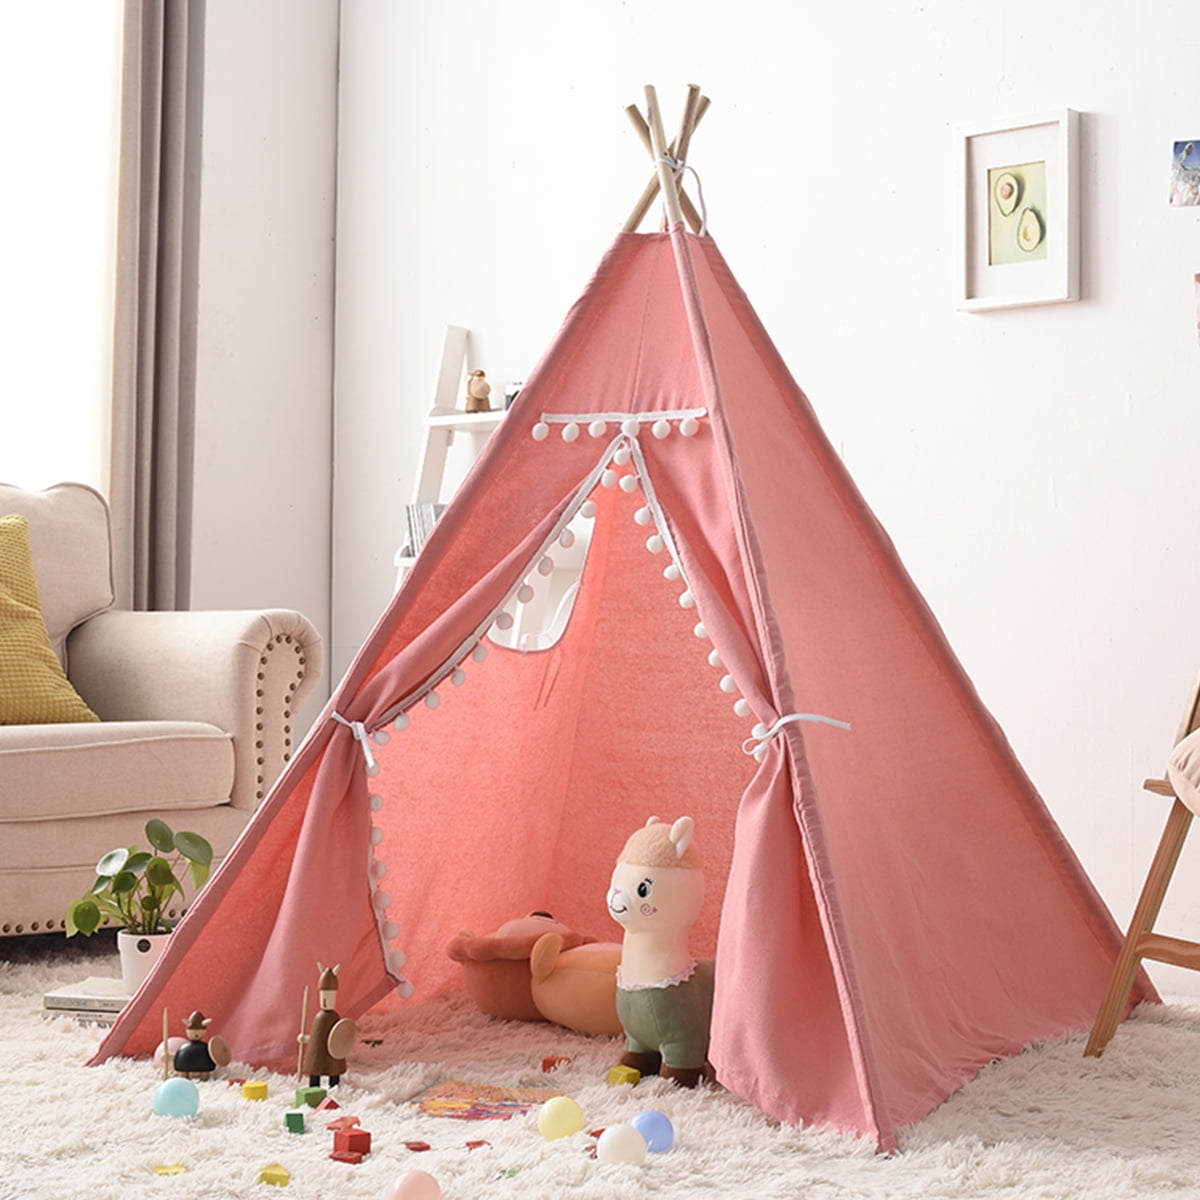 Kids Will Love This Playhouse 160cm Tall Perfect Wigwam for Adventures Childrens Teepee Play Tent with Floor Mat Stunning White with Grey Hearts Pattern 100% Cotton